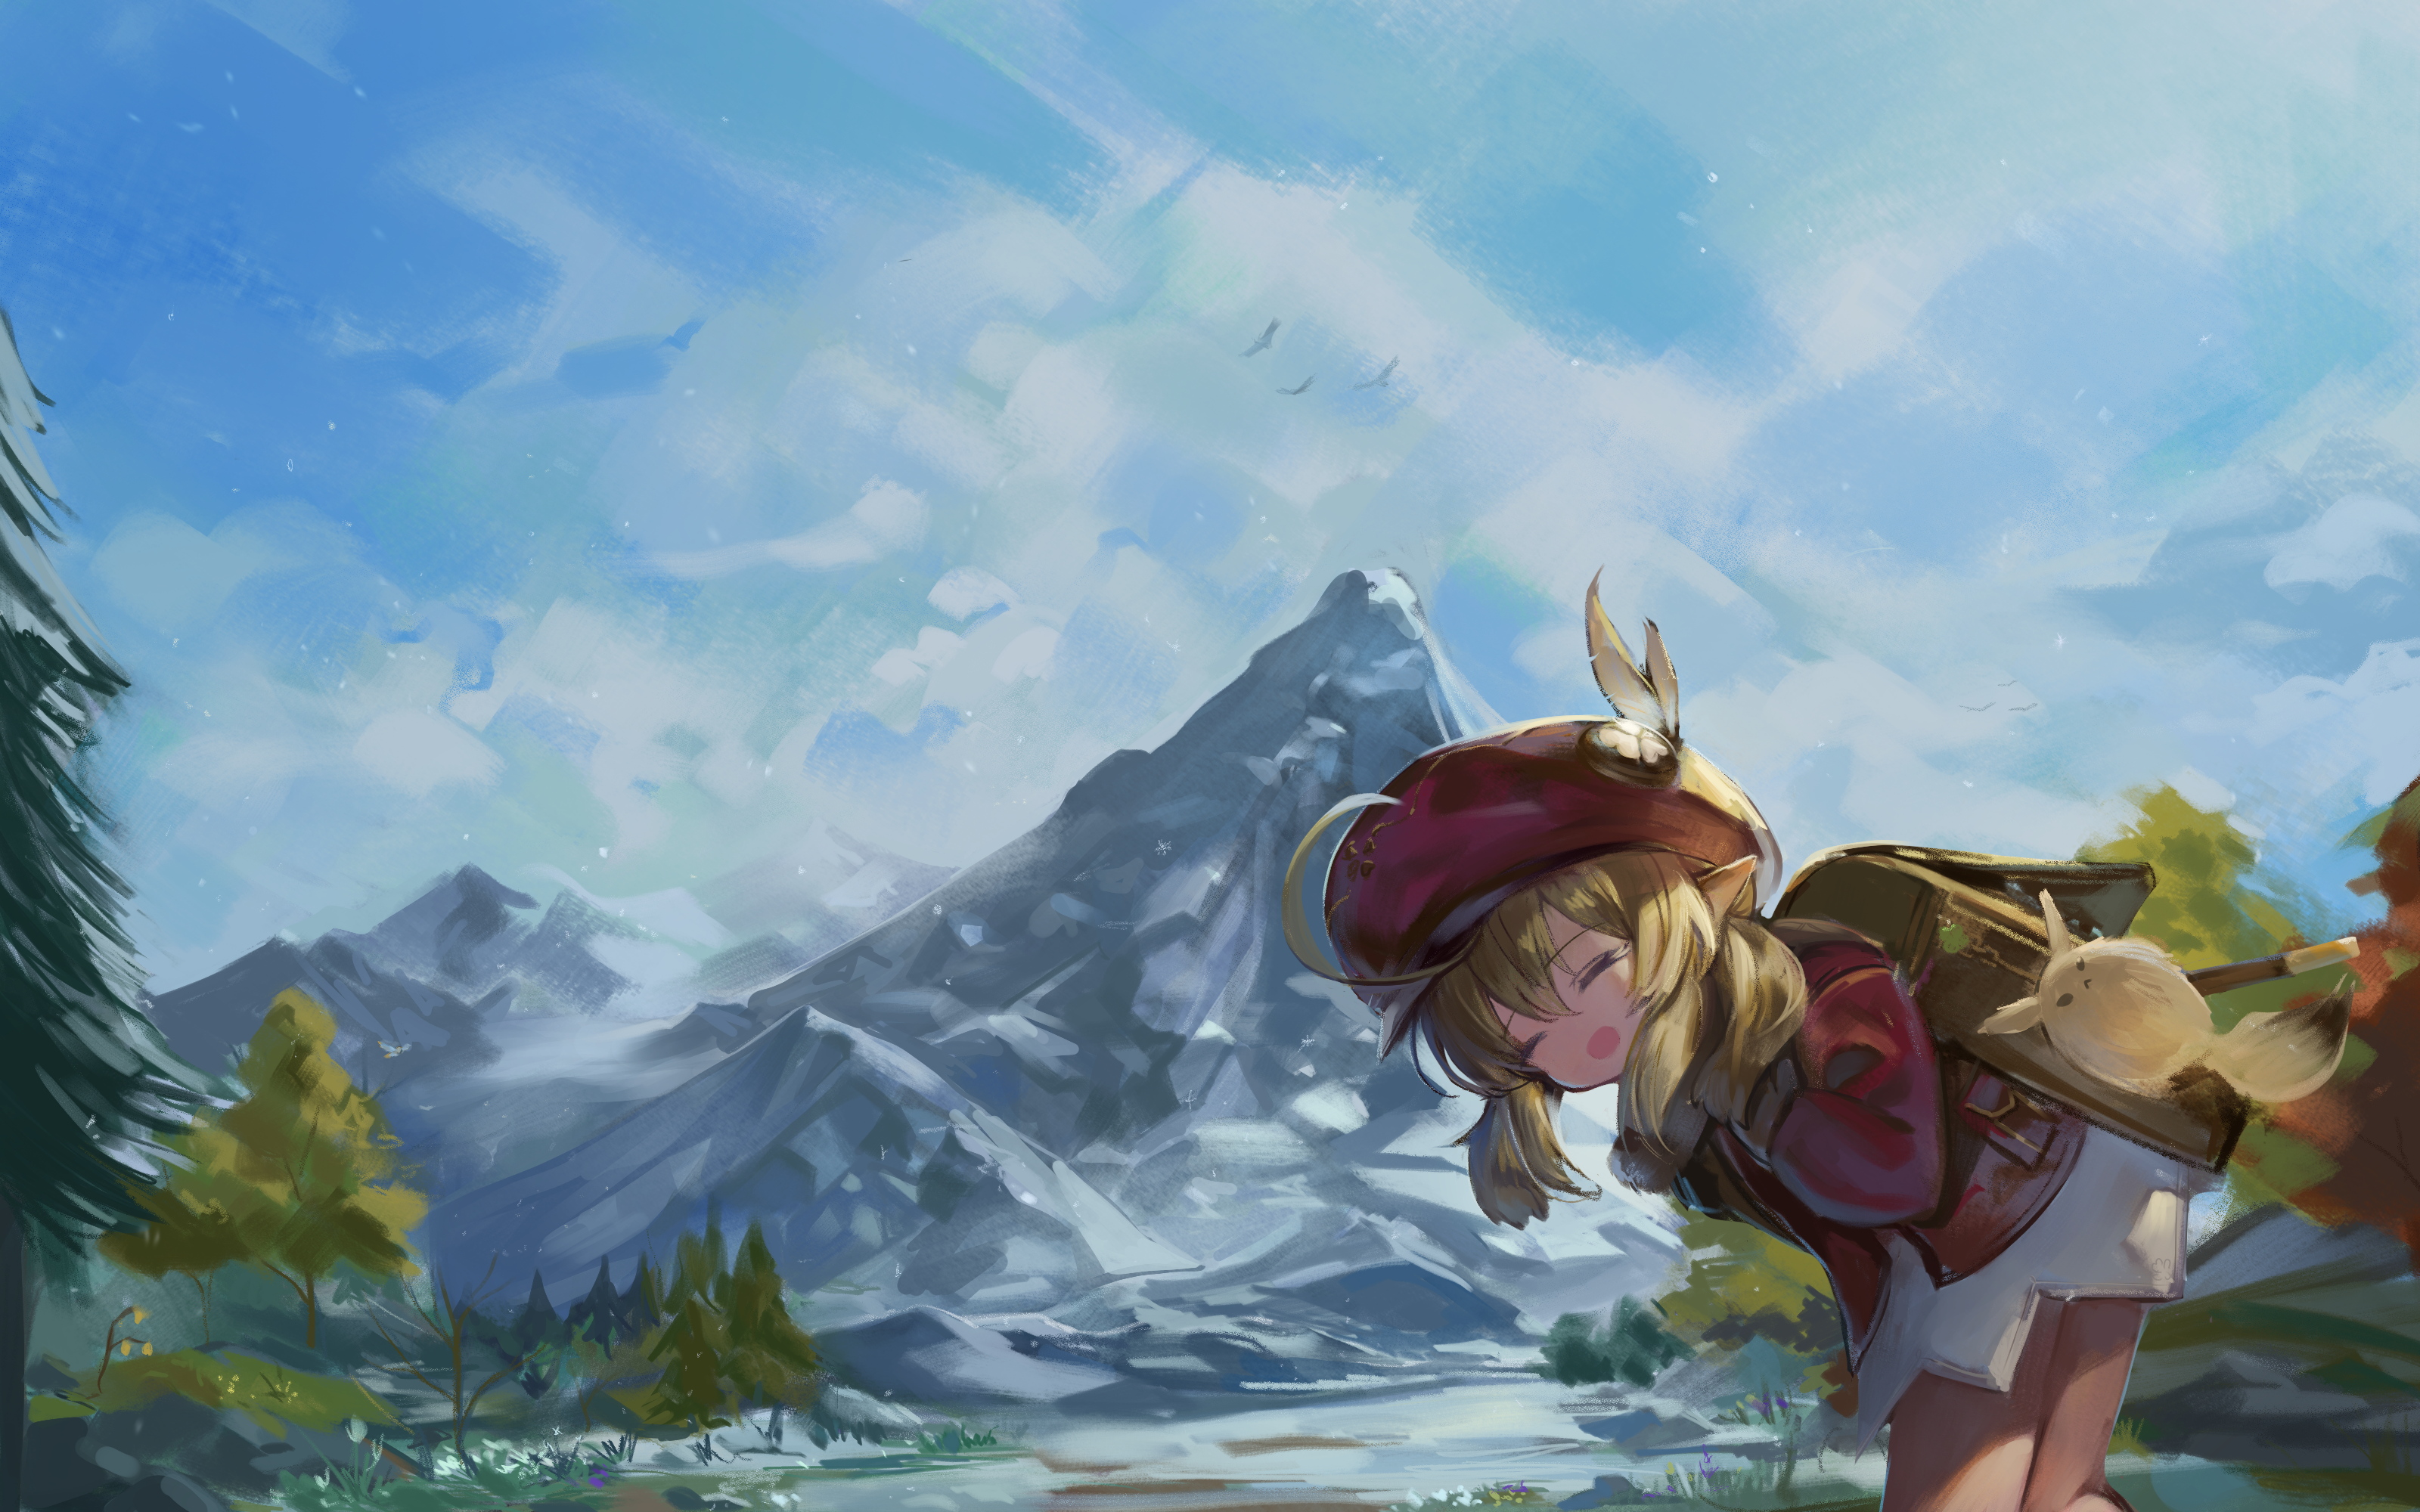 Anime 3200x2000 anime anime girls Klee (Genshin Impact) sky Genshin Impact smiling pointy ears mountains outdoors women outdoors closed eyes open mouth backpacks trees loli twintails ahoge hat DoKoMoN standing nature